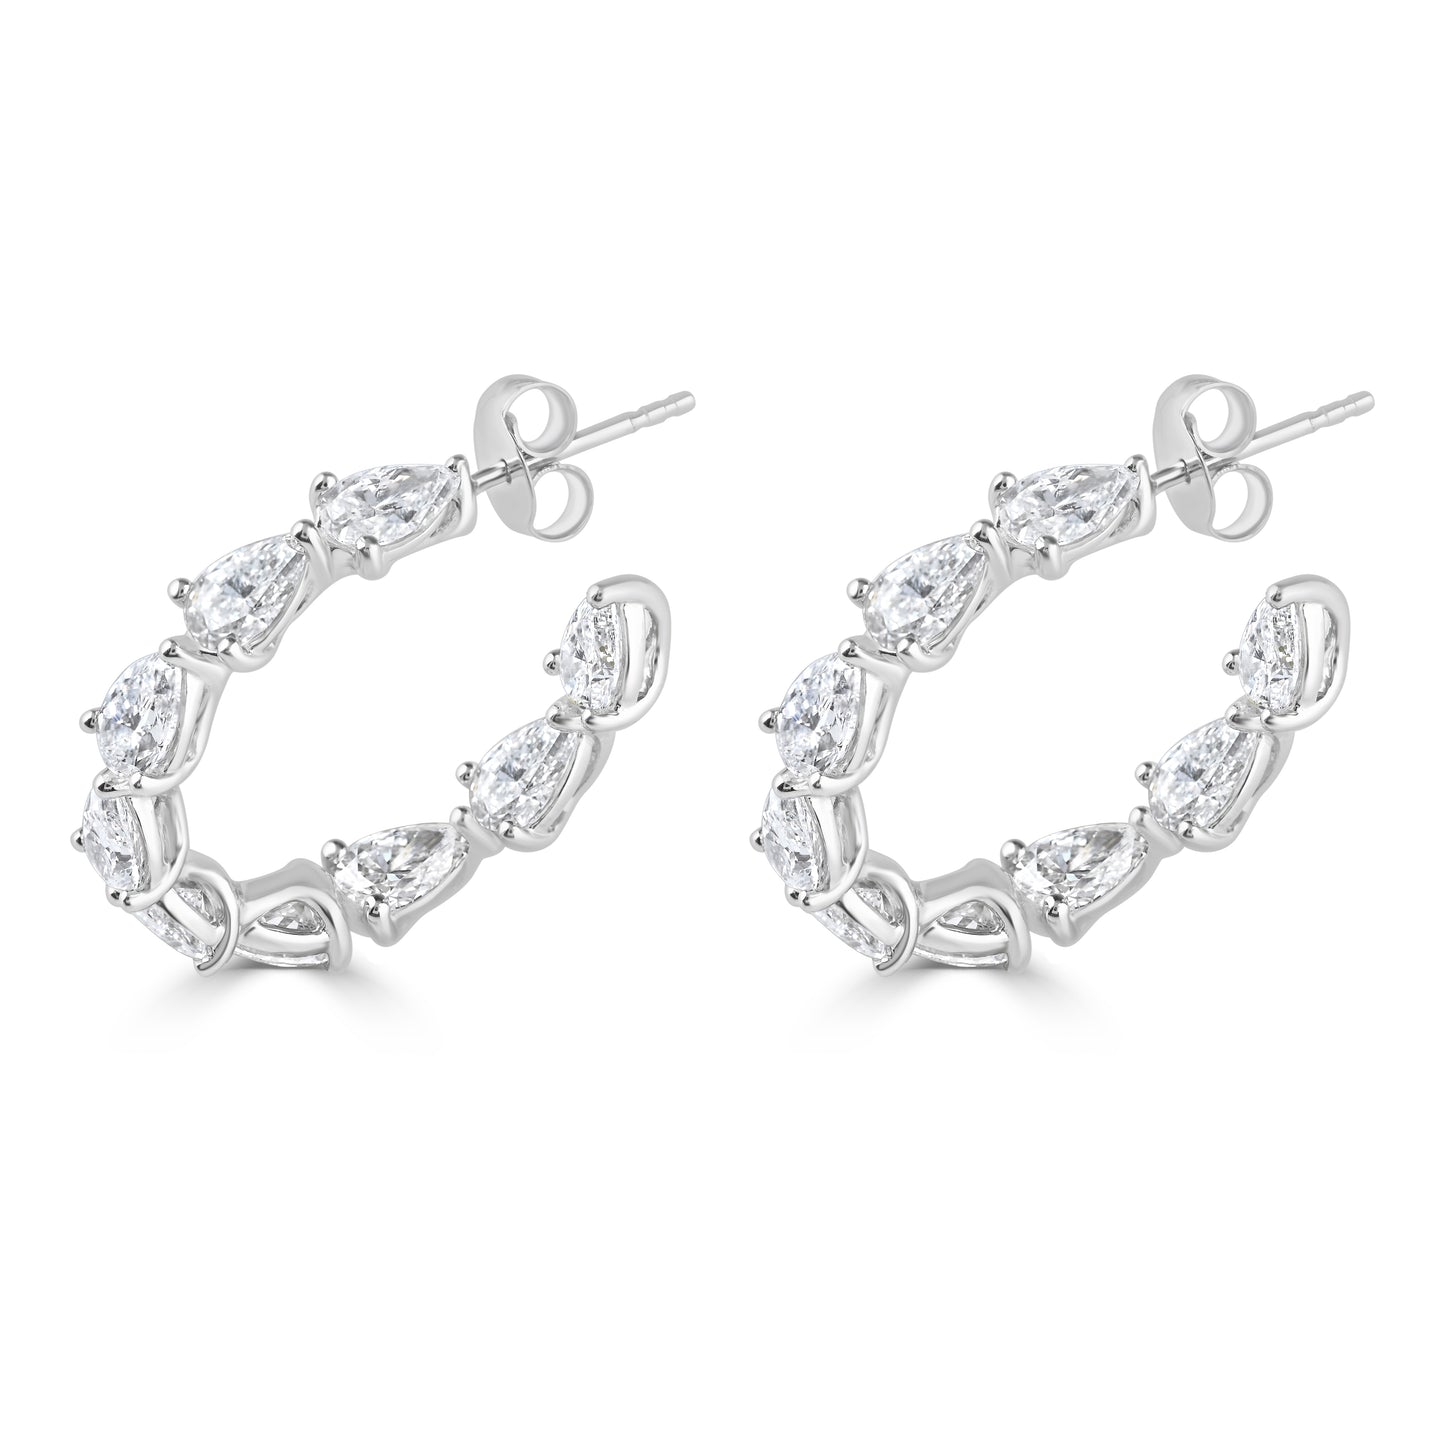 Pearl-Perfect Brilliance: Diamond Earrings in Captivating Pearl Shape